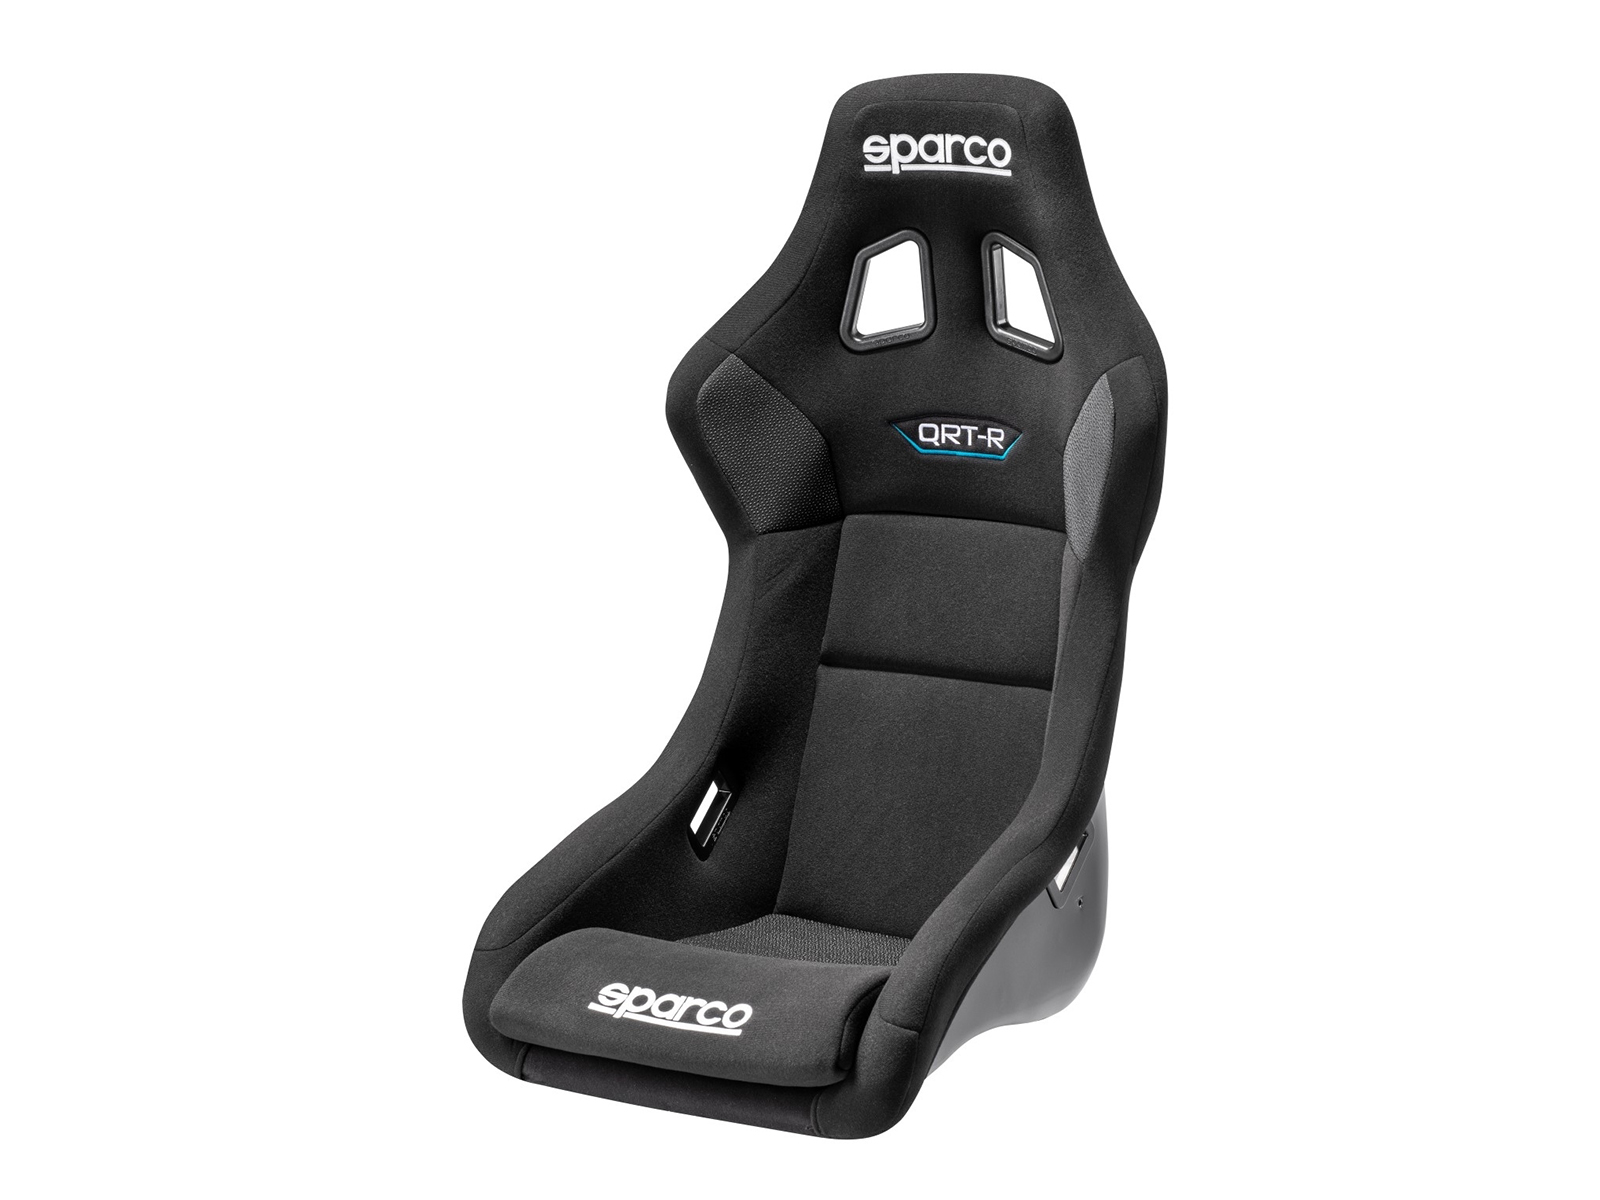 Sparco QRT-R Ultra-Light Racing Seat - FIA - Z1 Motorsports - Performance  OEM and Aftermarket Engineered Parts Global Leader In 300ZX 350Z 370Z G35  G37 Q50 Q60